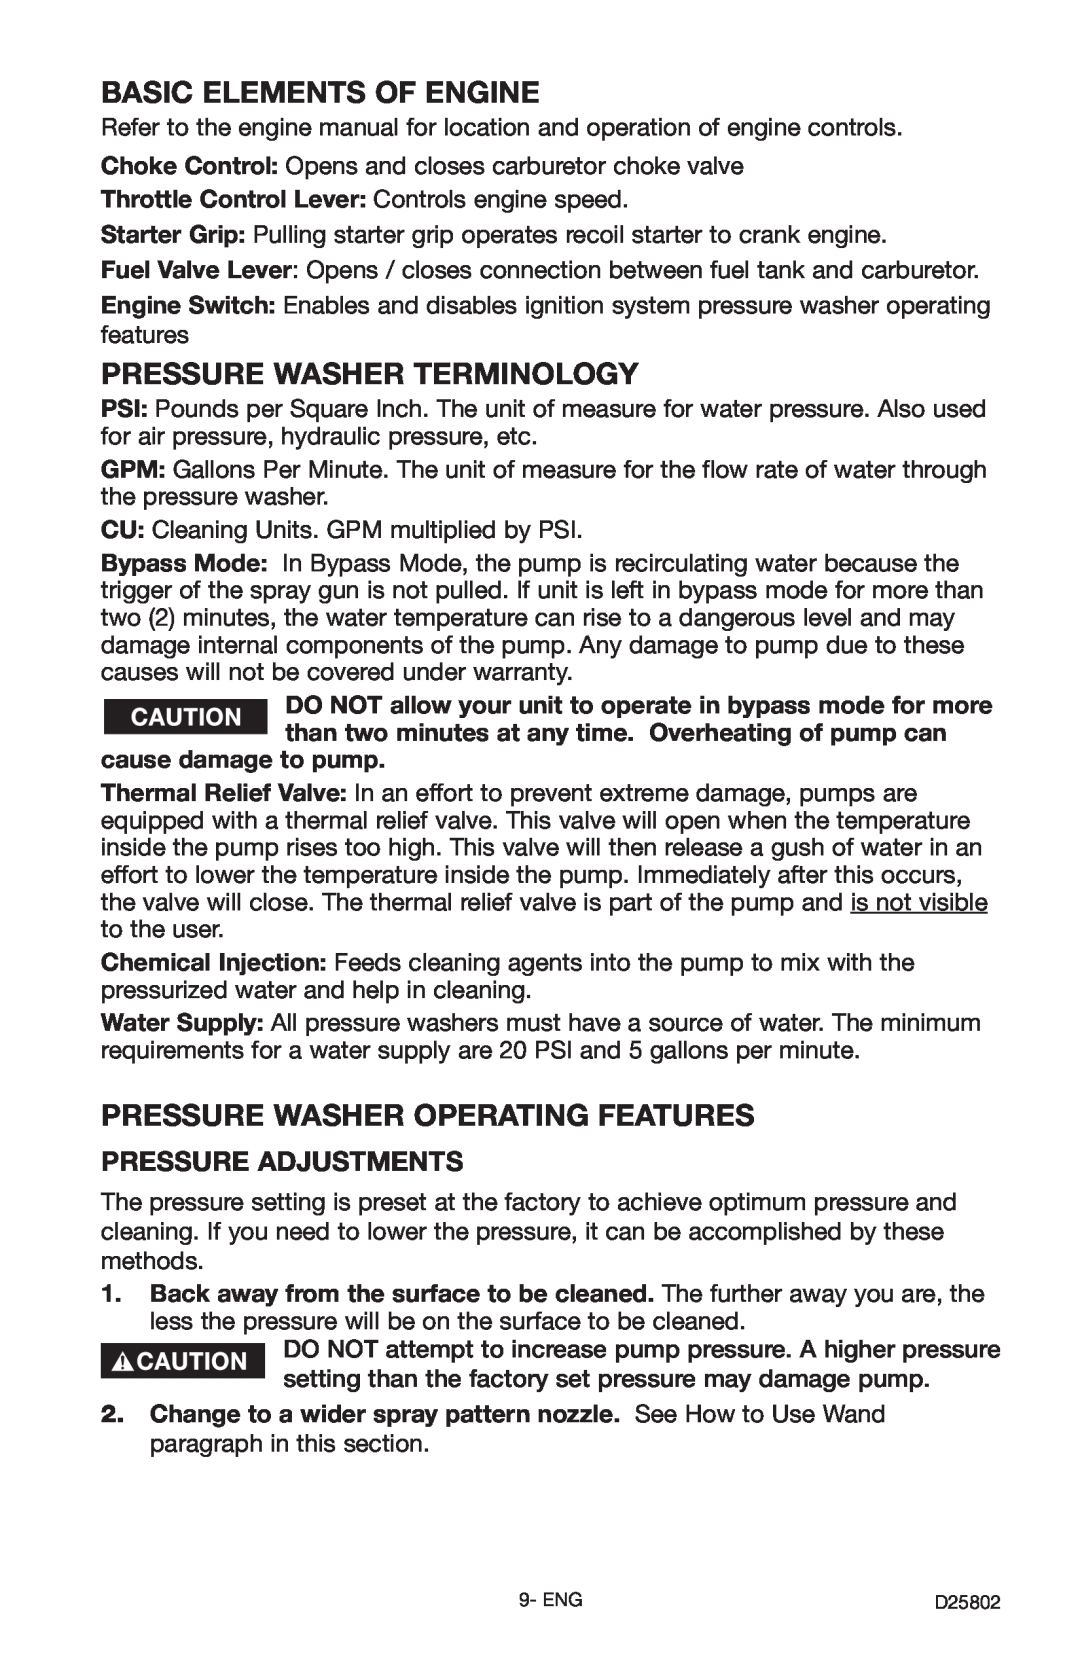 Porter-Cable PCV2250 Basic Elements Of Engine, Pressure Washer Terminology, Pressure Washer Operating Features 